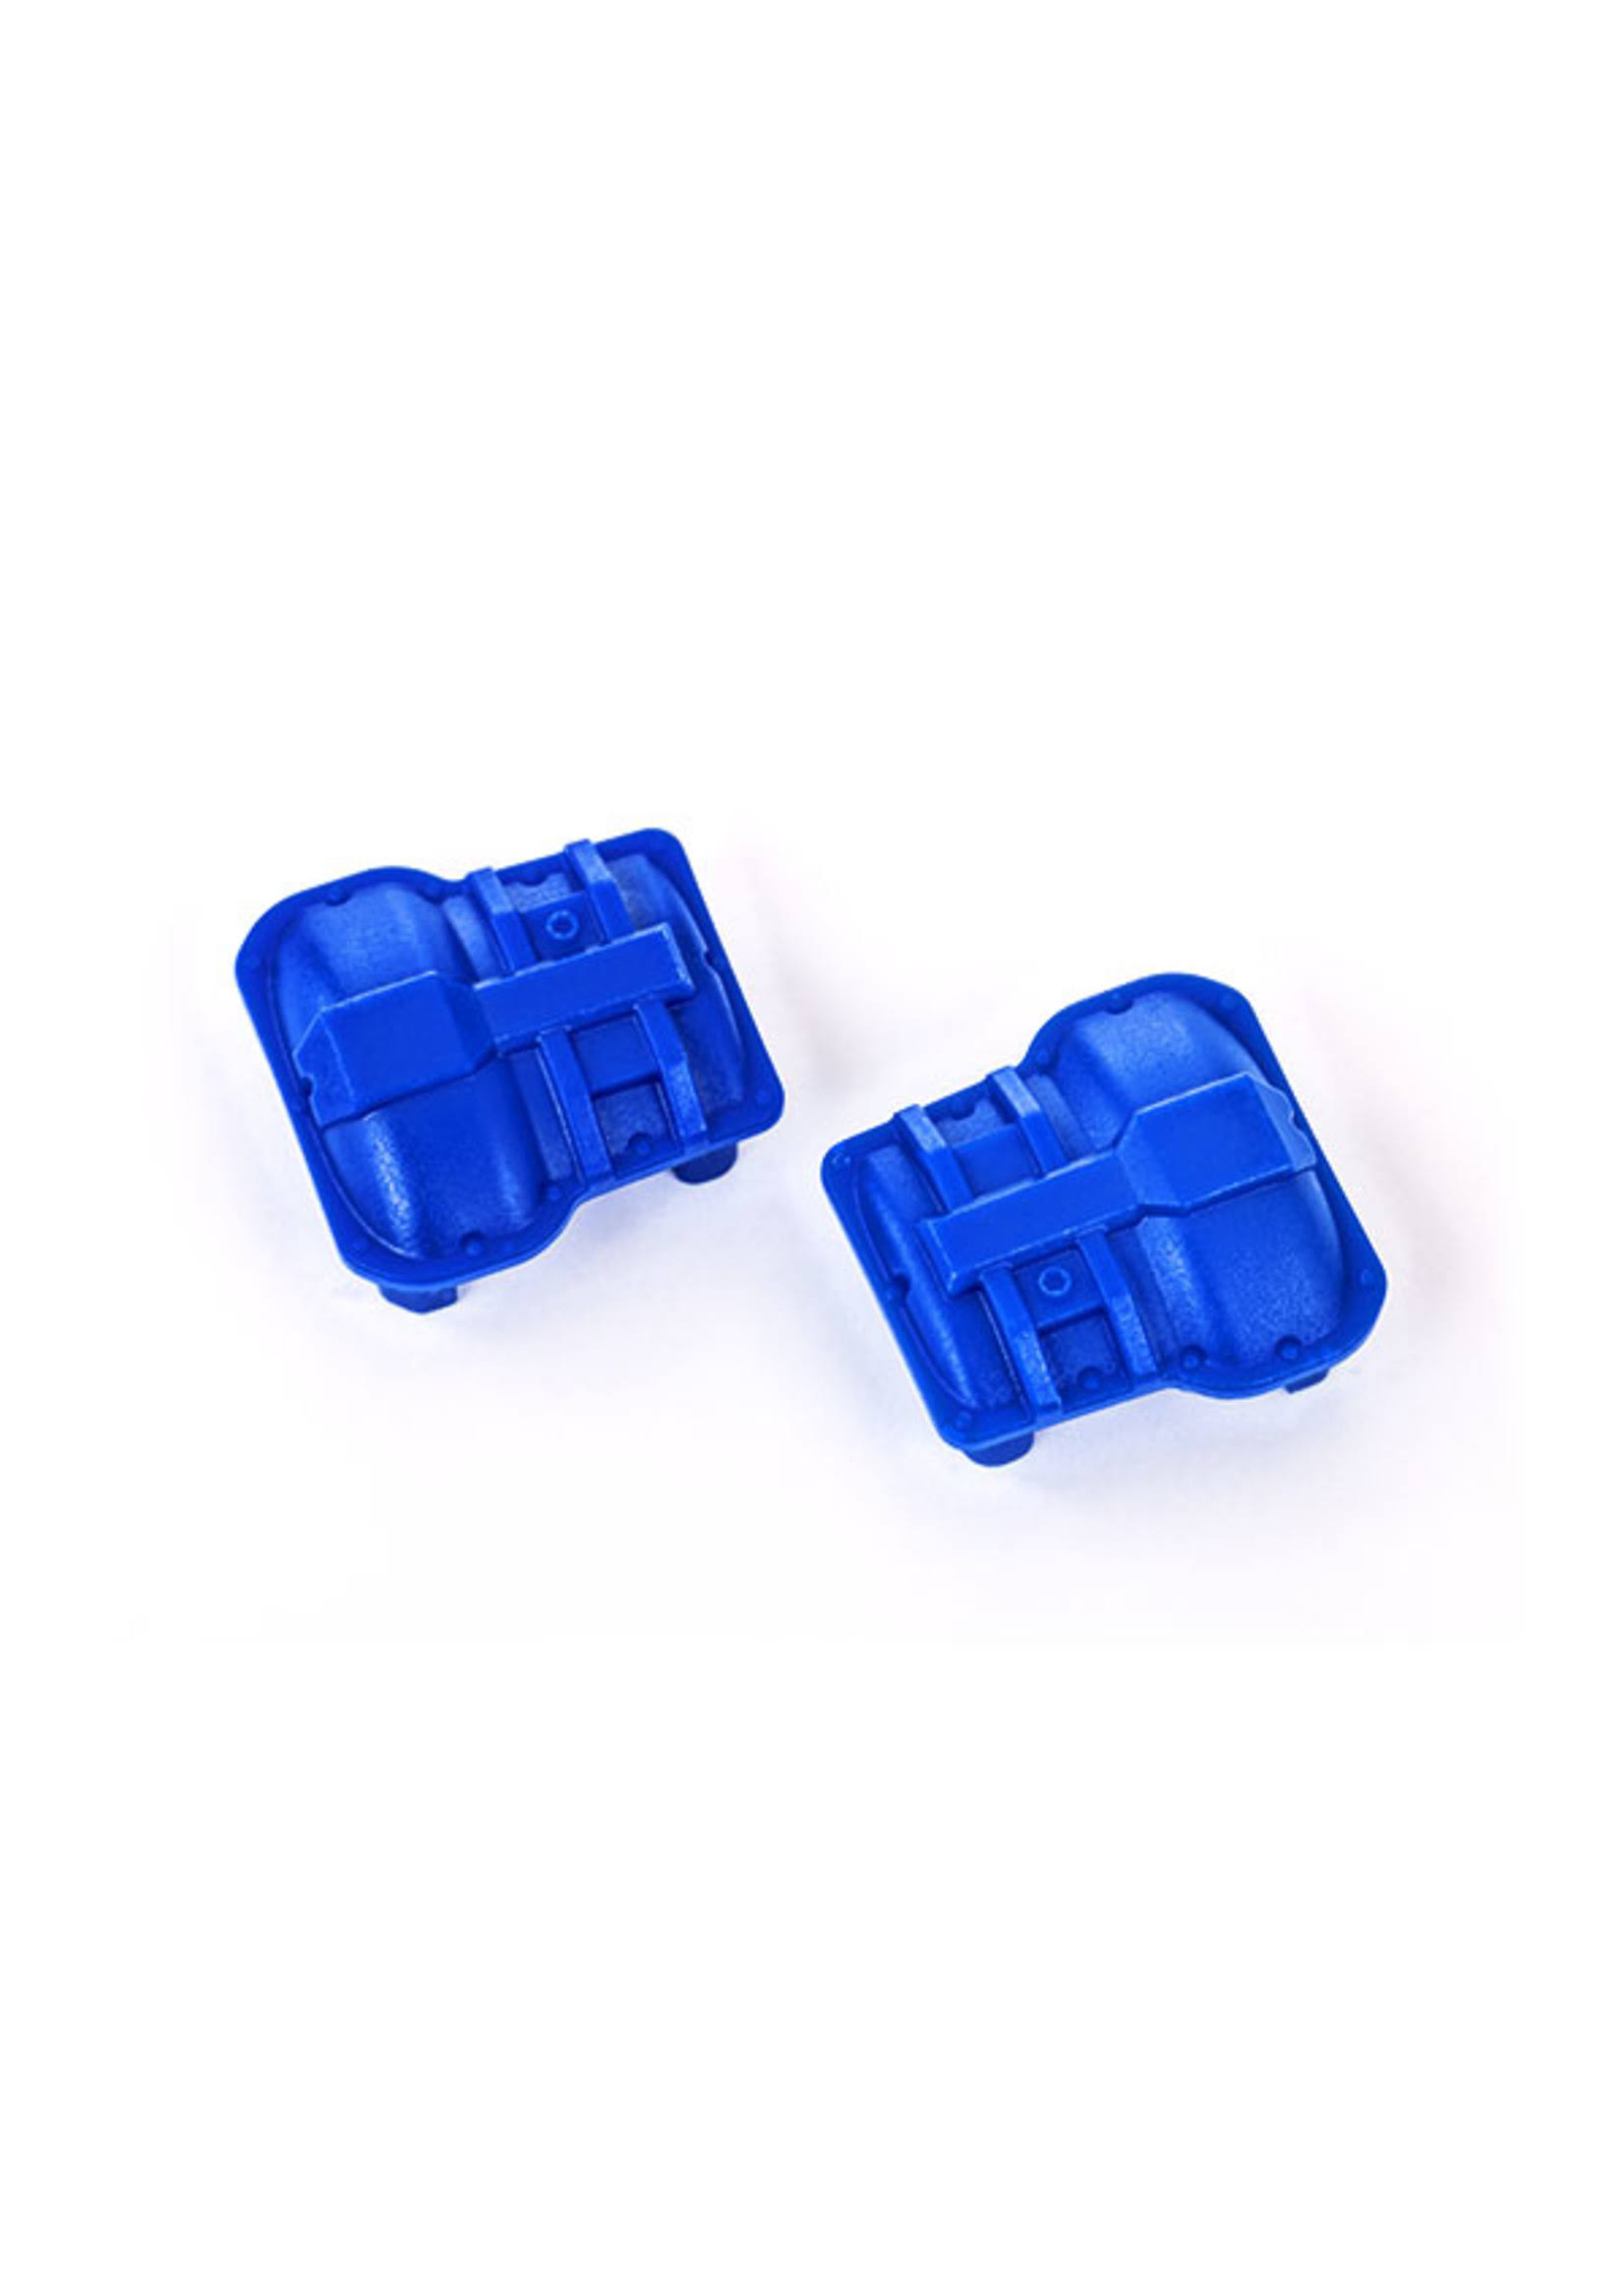 Traxxas Differential Cover, Front or Rear (Blue) (2) TRX9738-BLUE